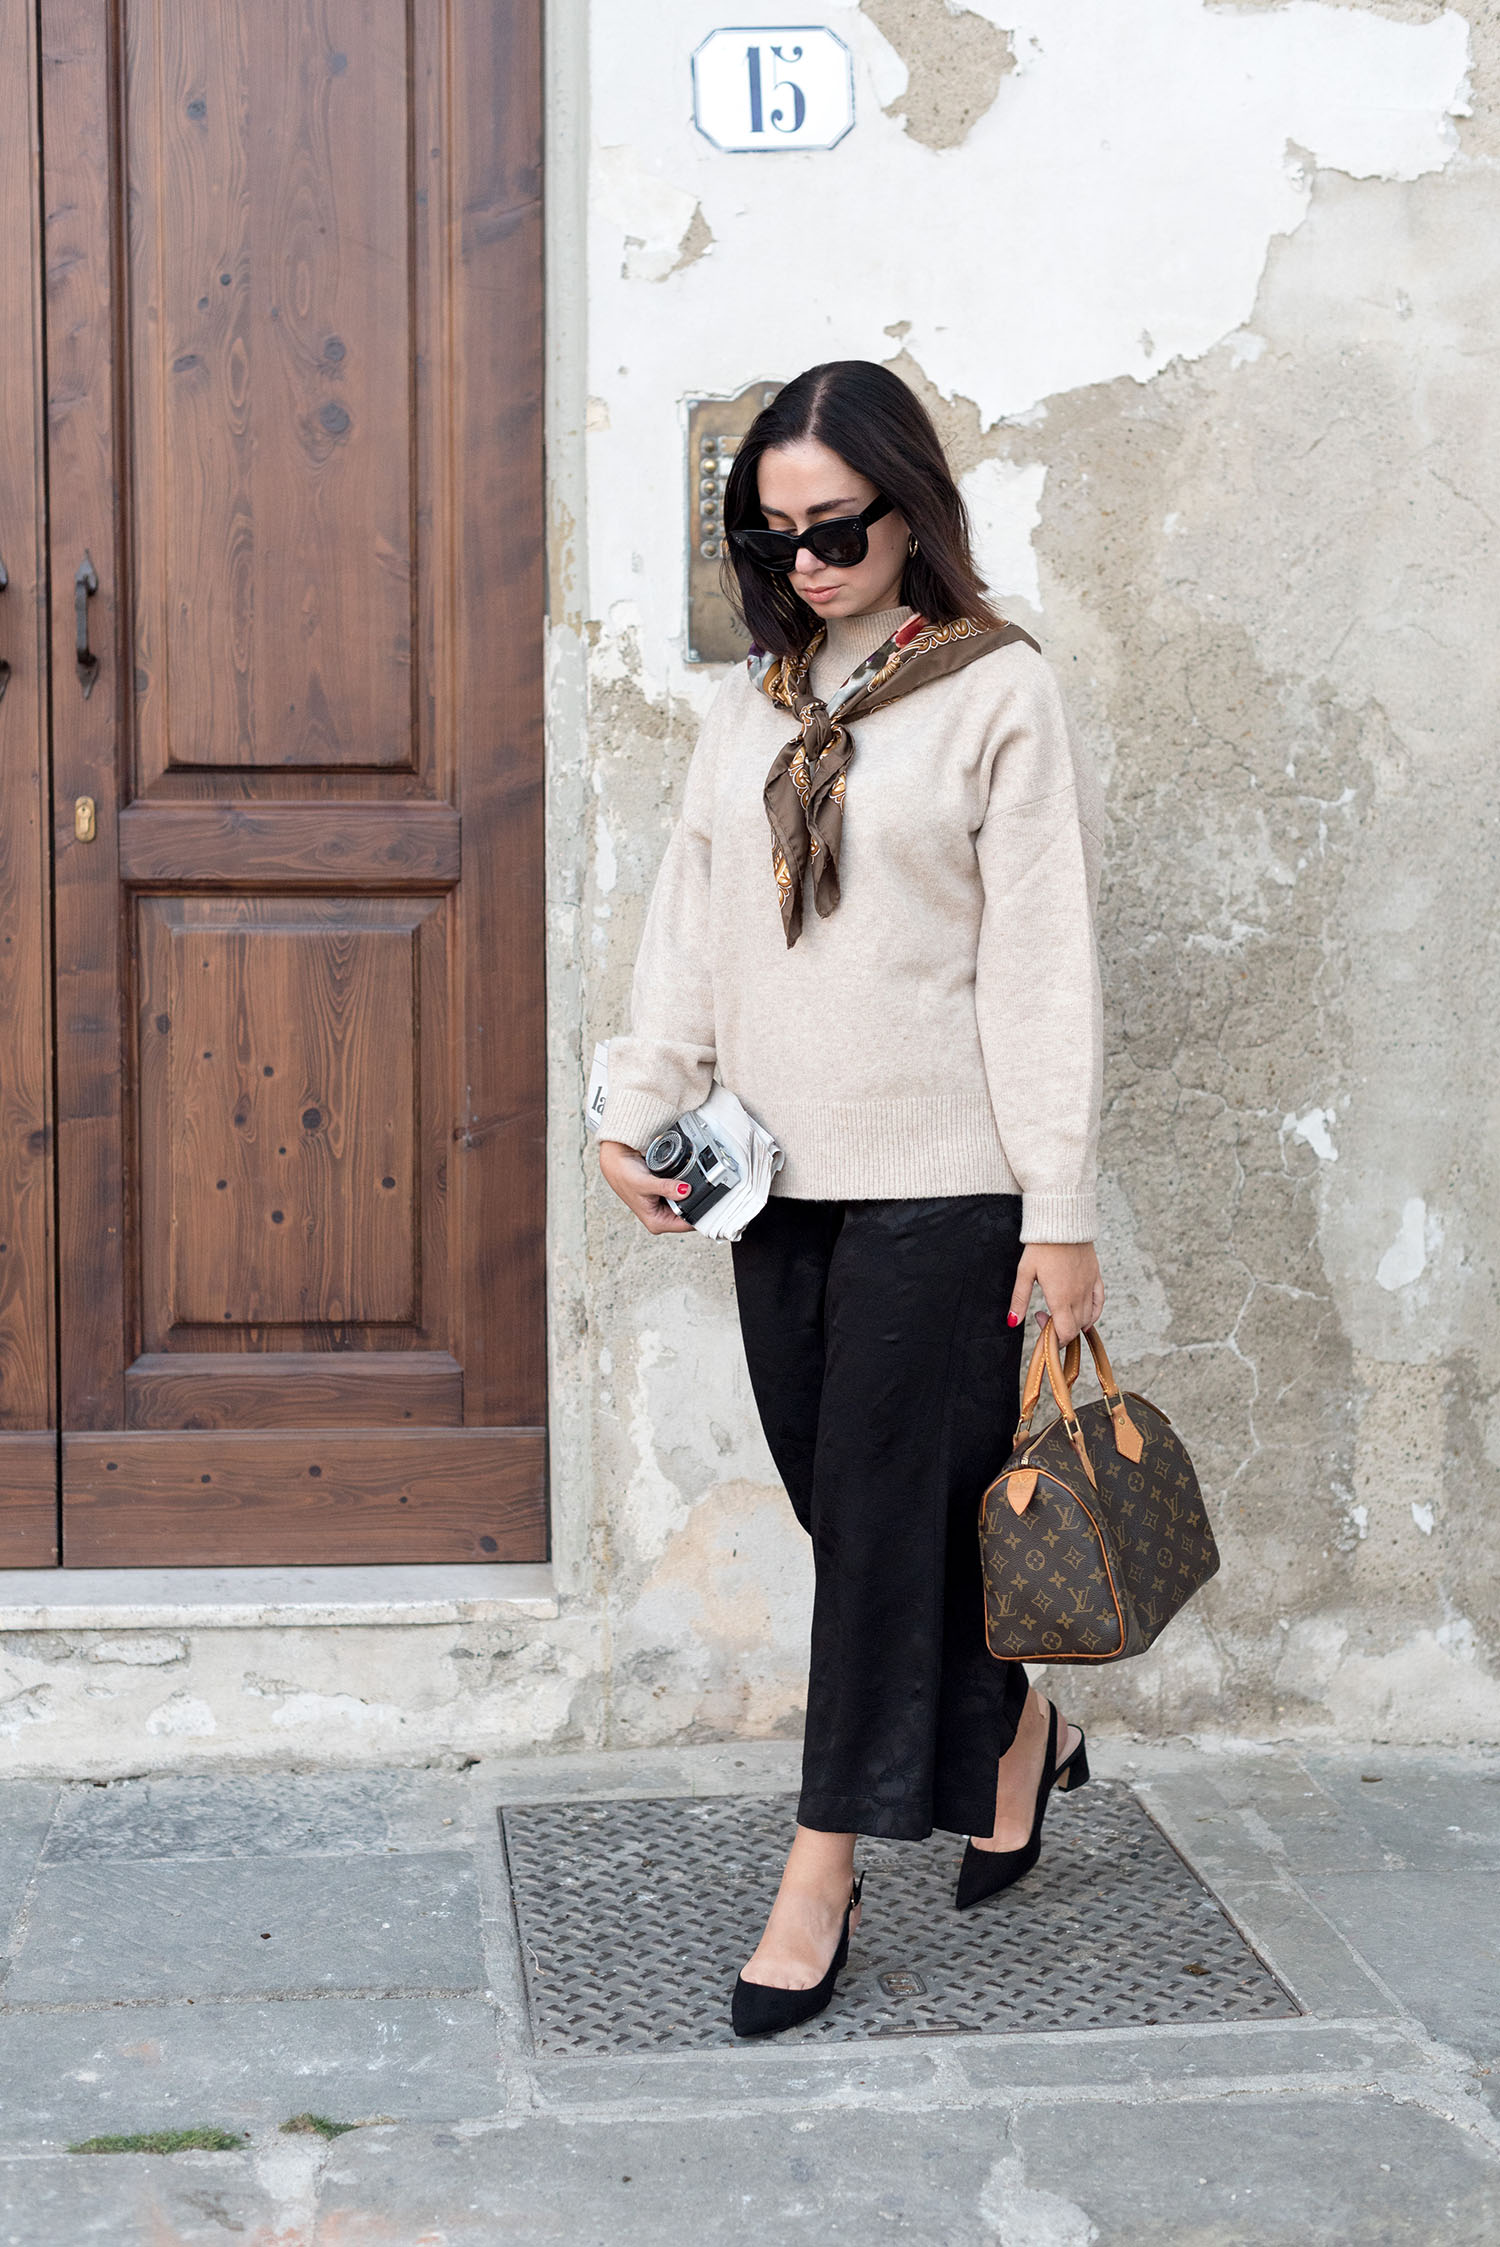 Top Canadian fashion blogger Cee Fardoe of Coco & Vera in Florence, Italy, wearing an H&M sweater and carrying a Louis Vuitton Speedy 25 handbag